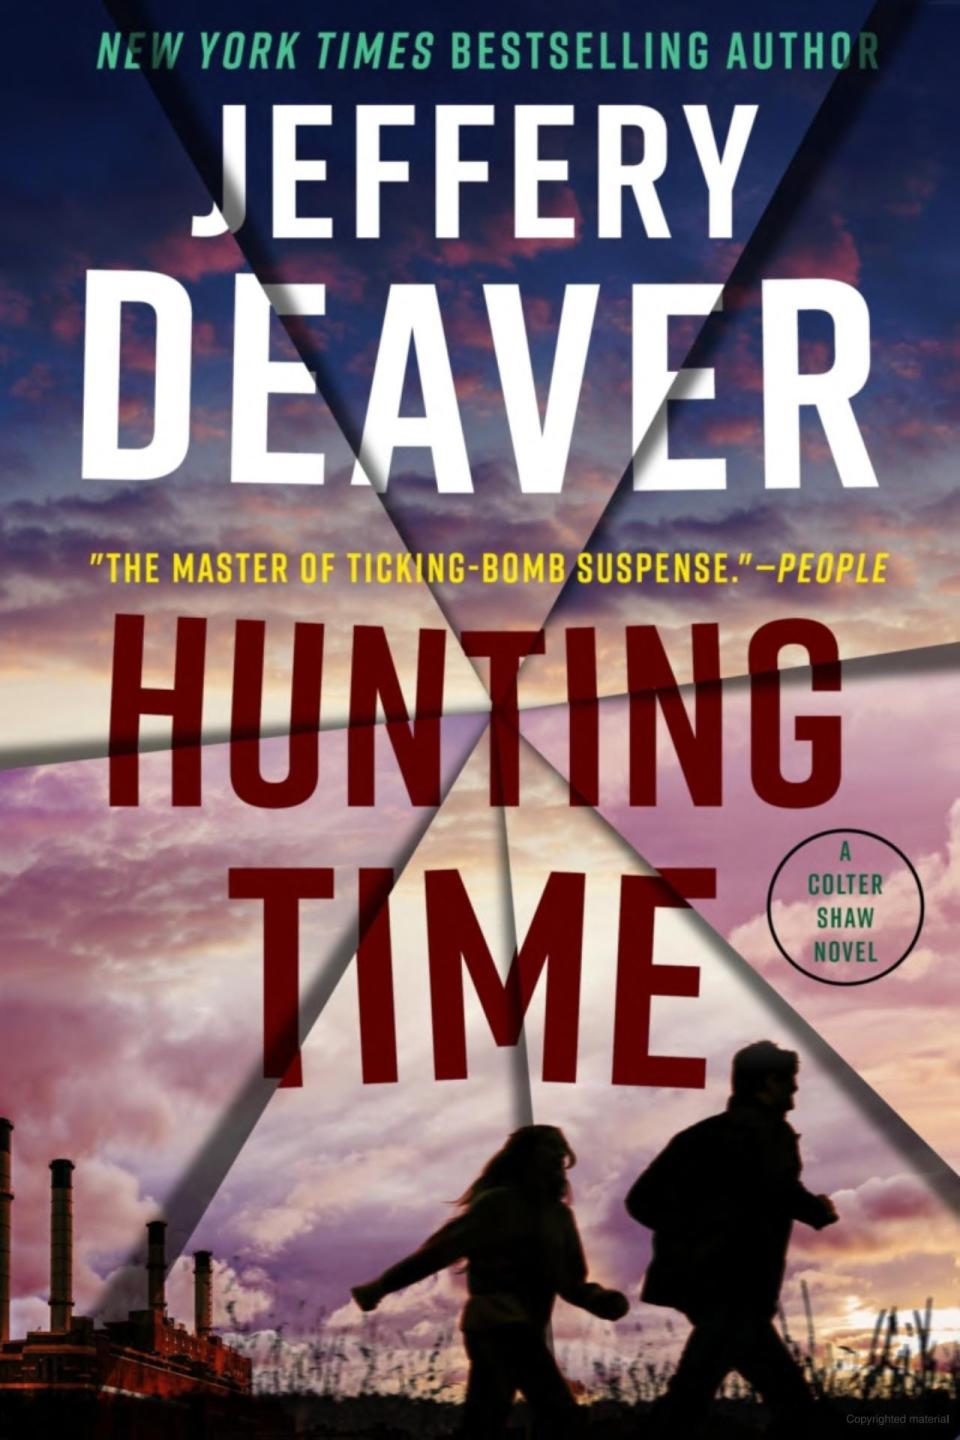 "Hunting Time" by Jeffery Deaver